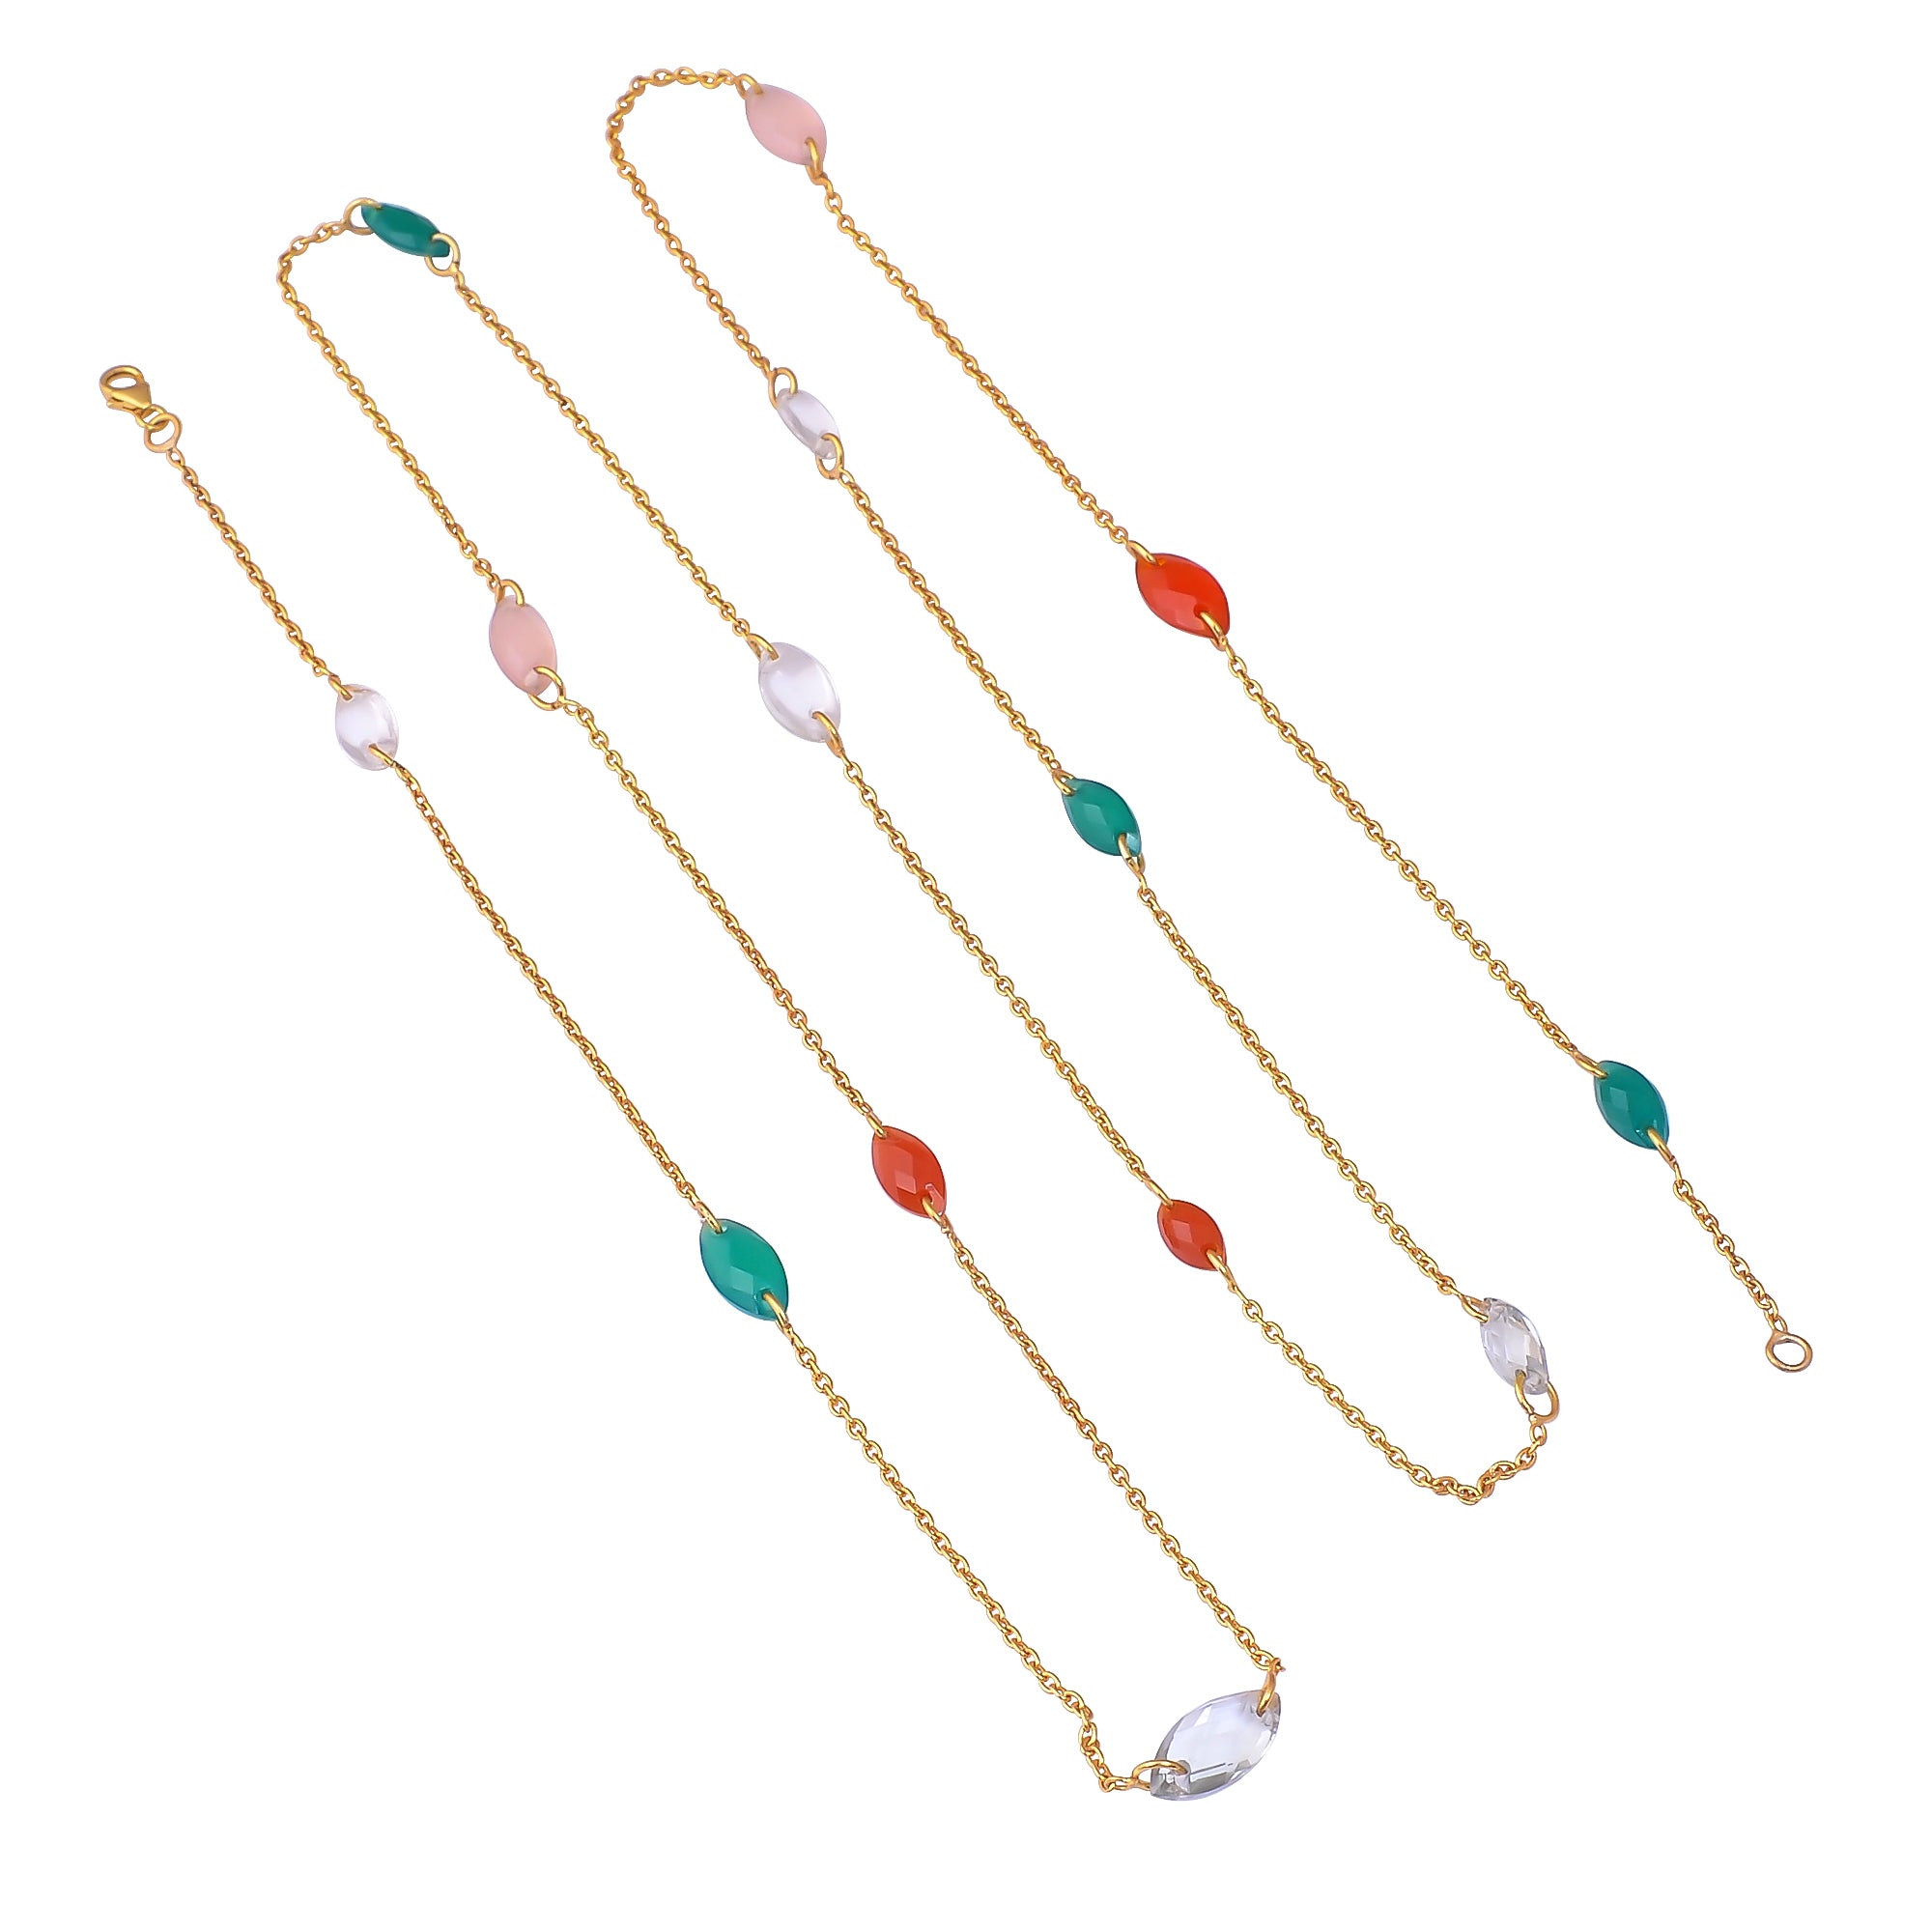 Buy Indian Handcrafted Silver Gold Plated Multi Stone Long Necklace